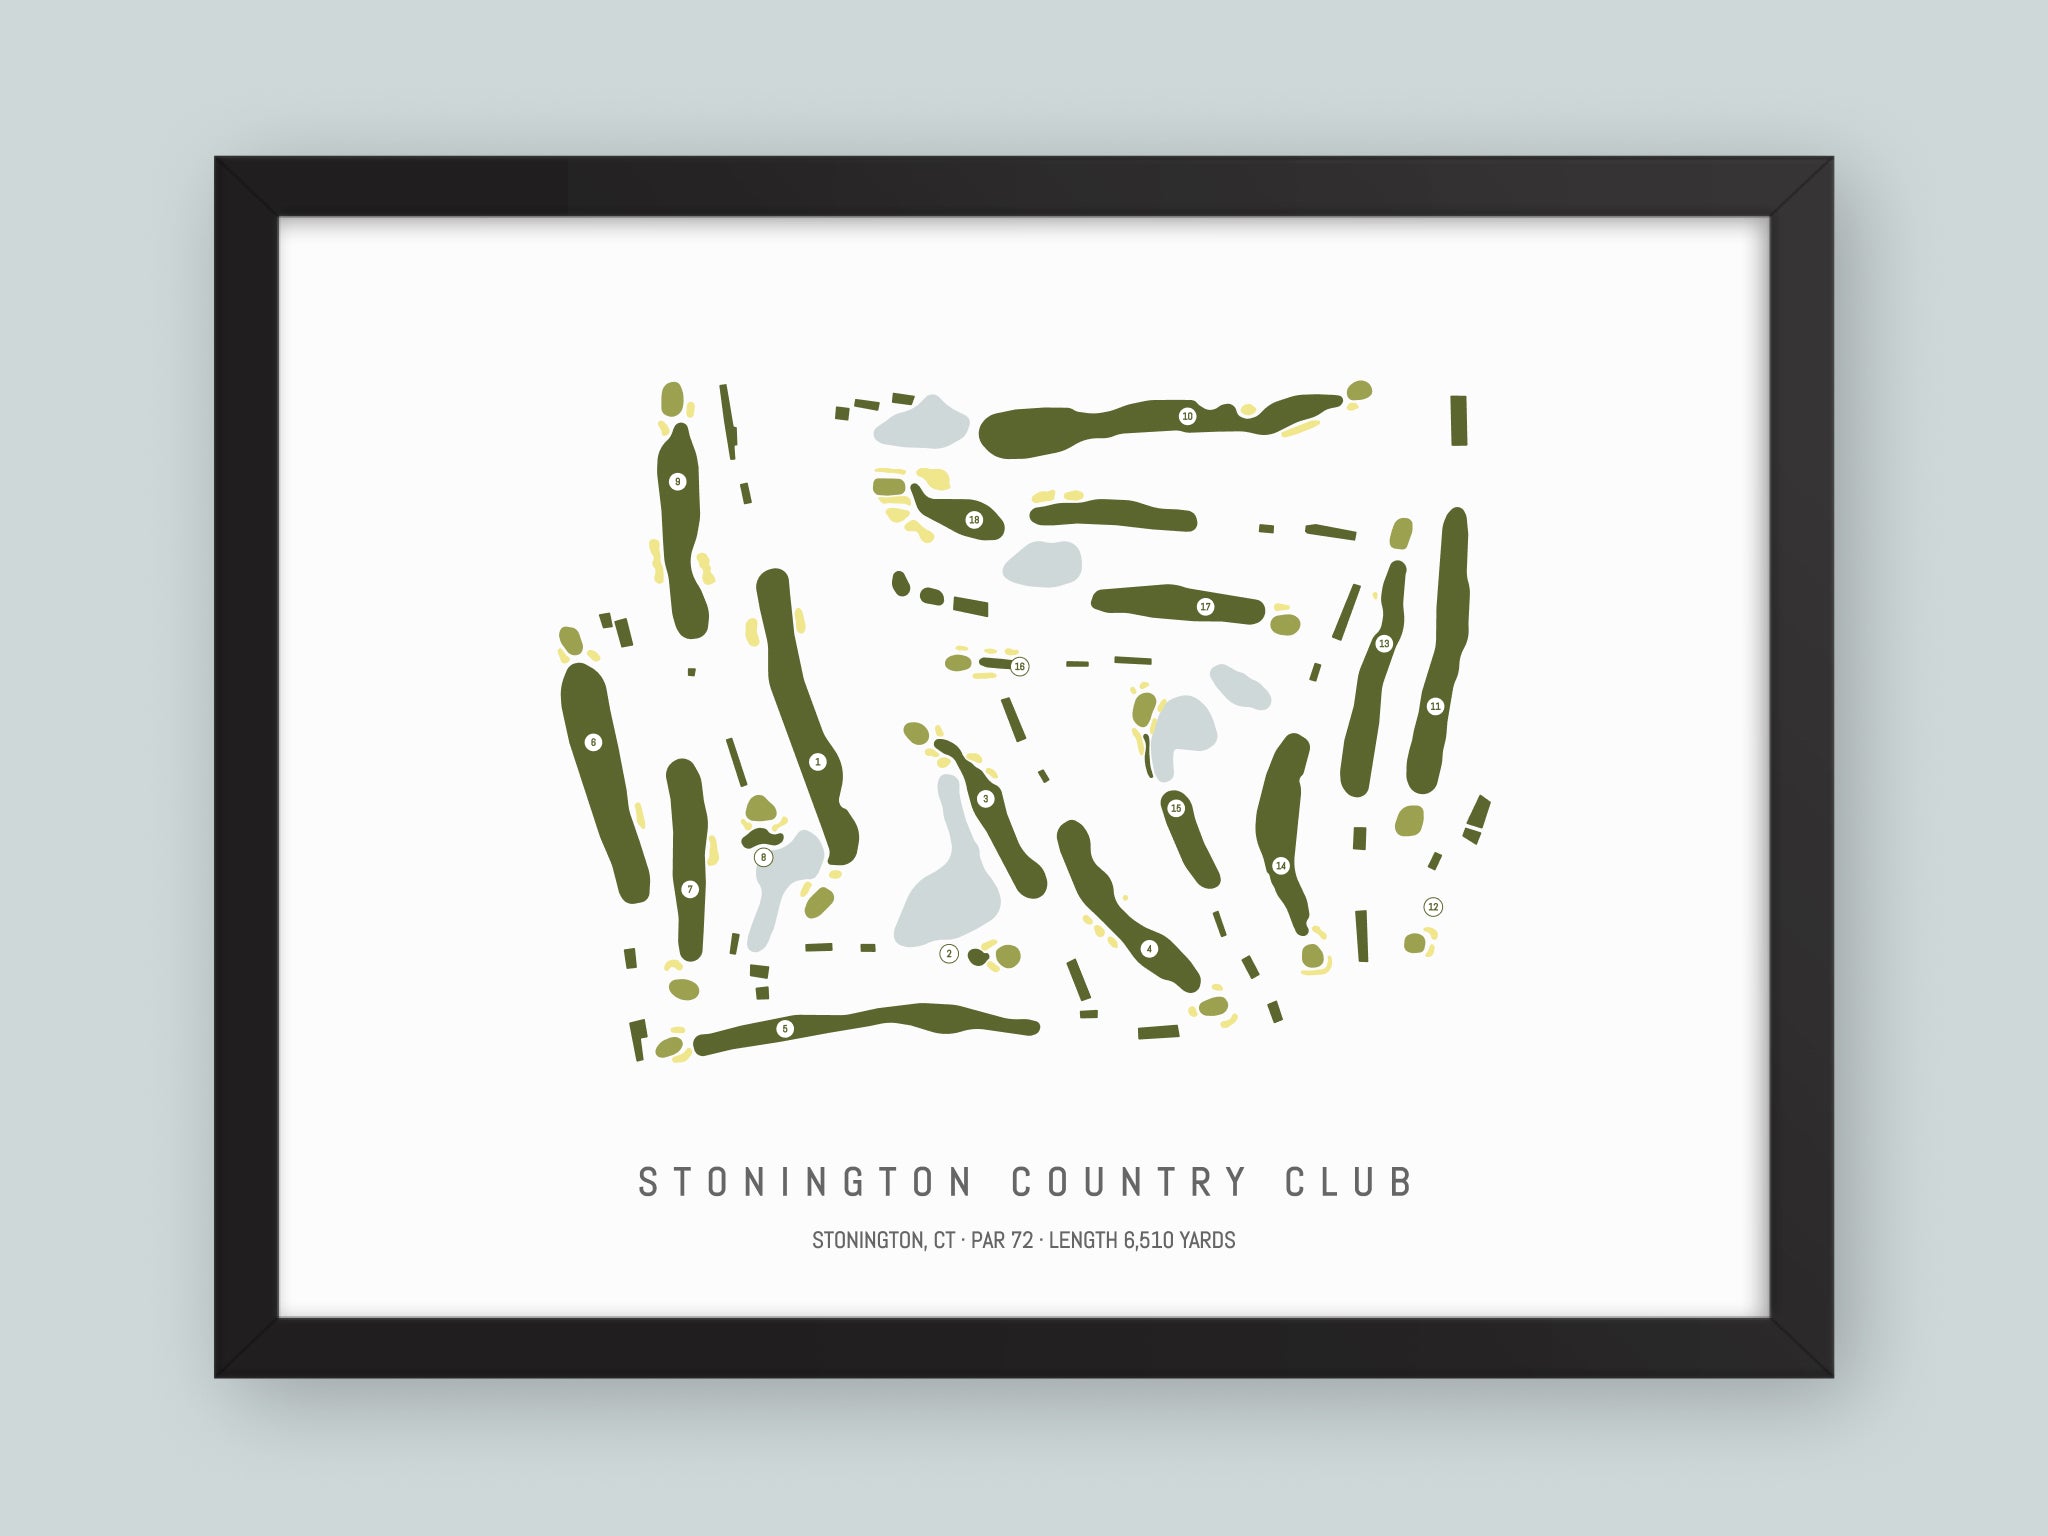 Stonington-Country-Club-CT--Black-Frame-24x18-With-Hole-Numbers